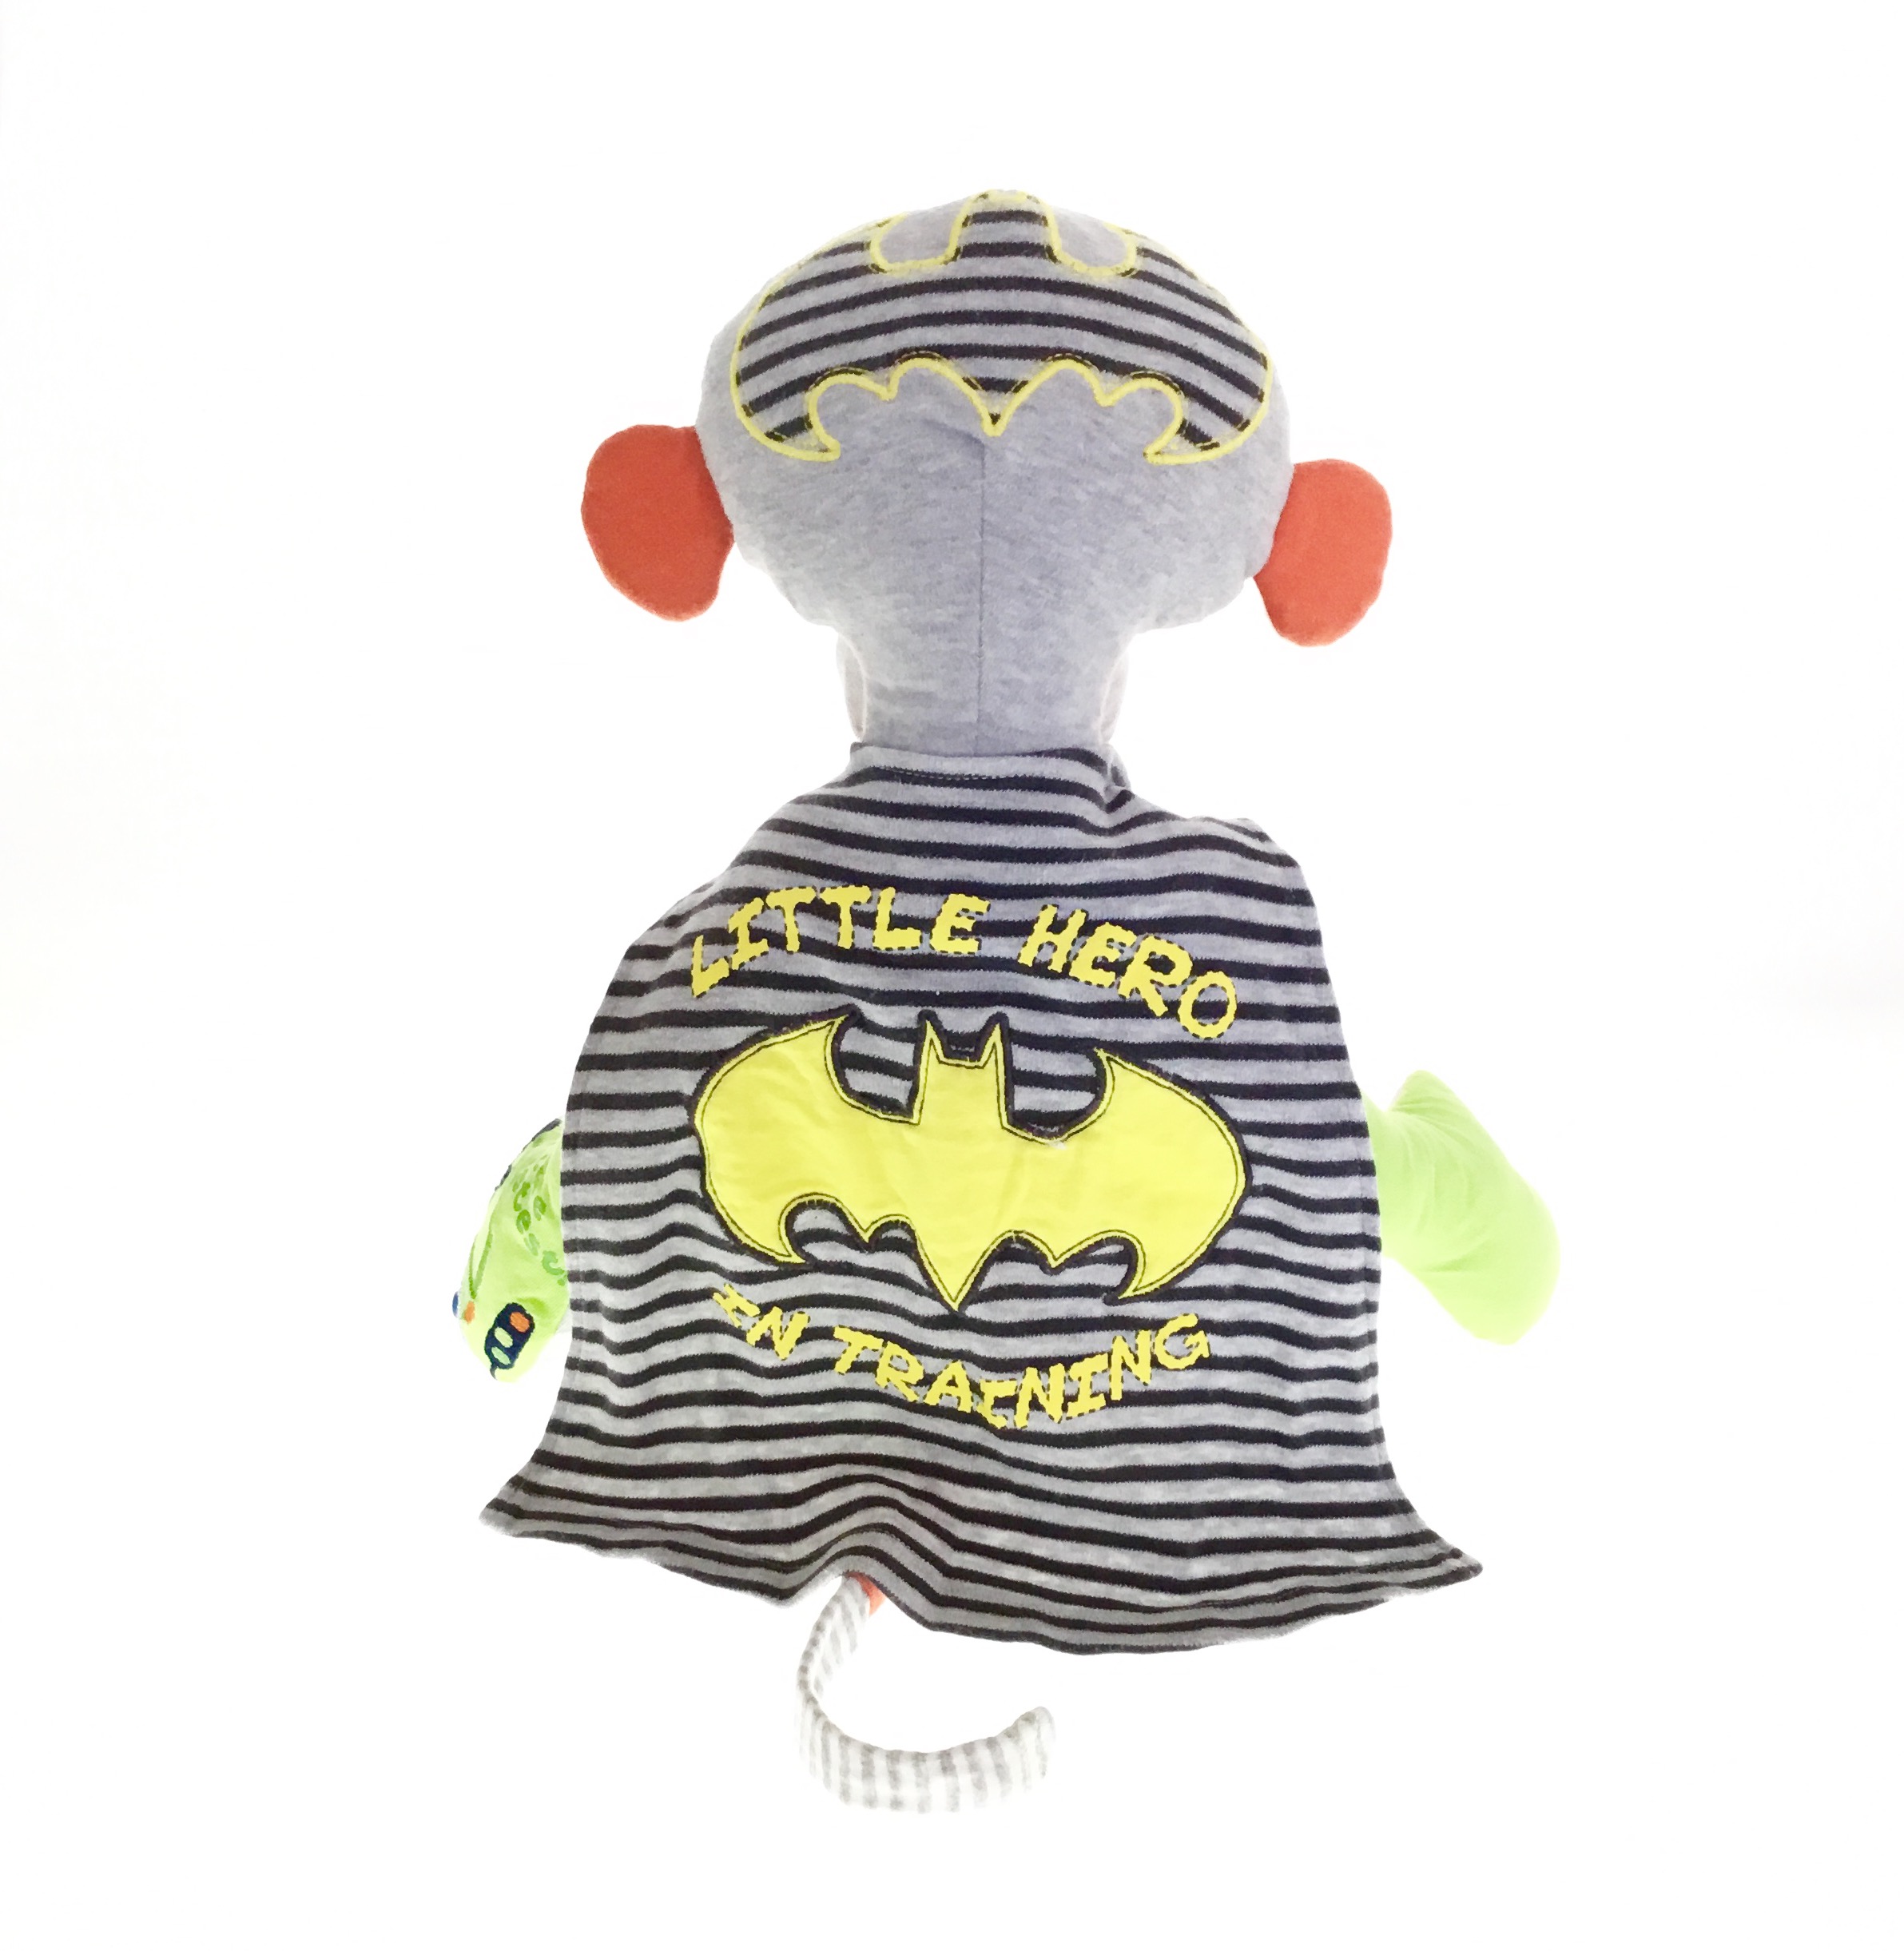 Baby boy Keepsake accessories, cape finishing touches for keepsakes